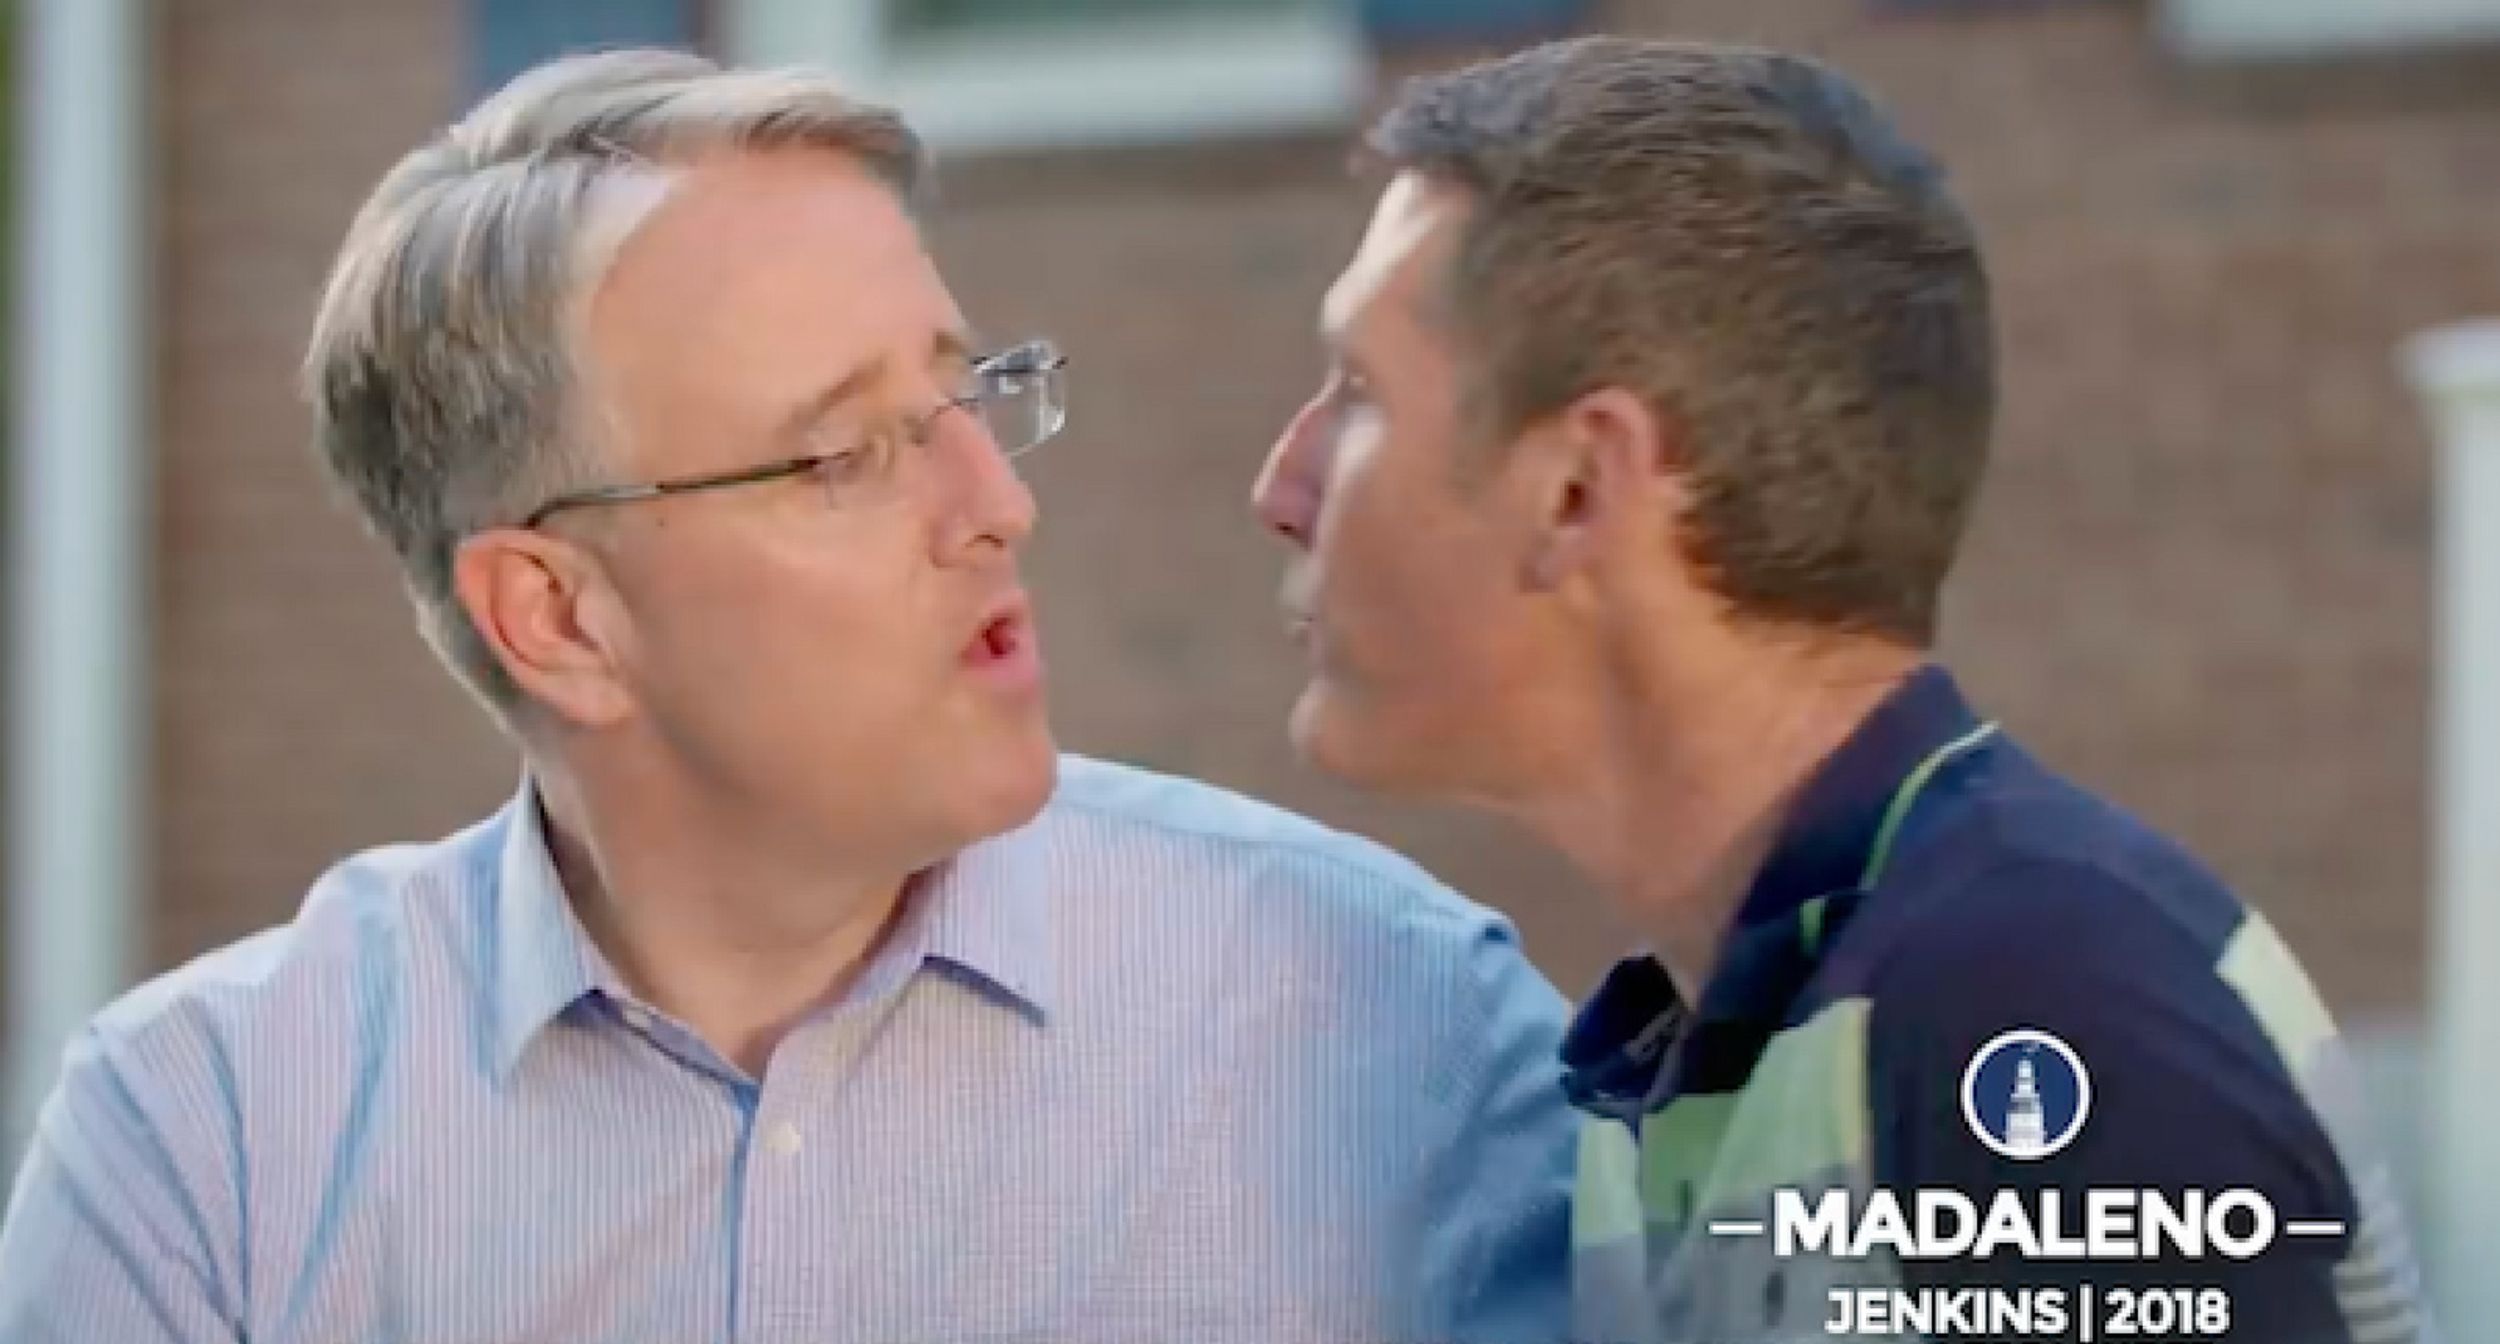 Gay Politician Kisses His Spouse In A First For Political TV Ads—And Airs It During 'Fox & Friends'